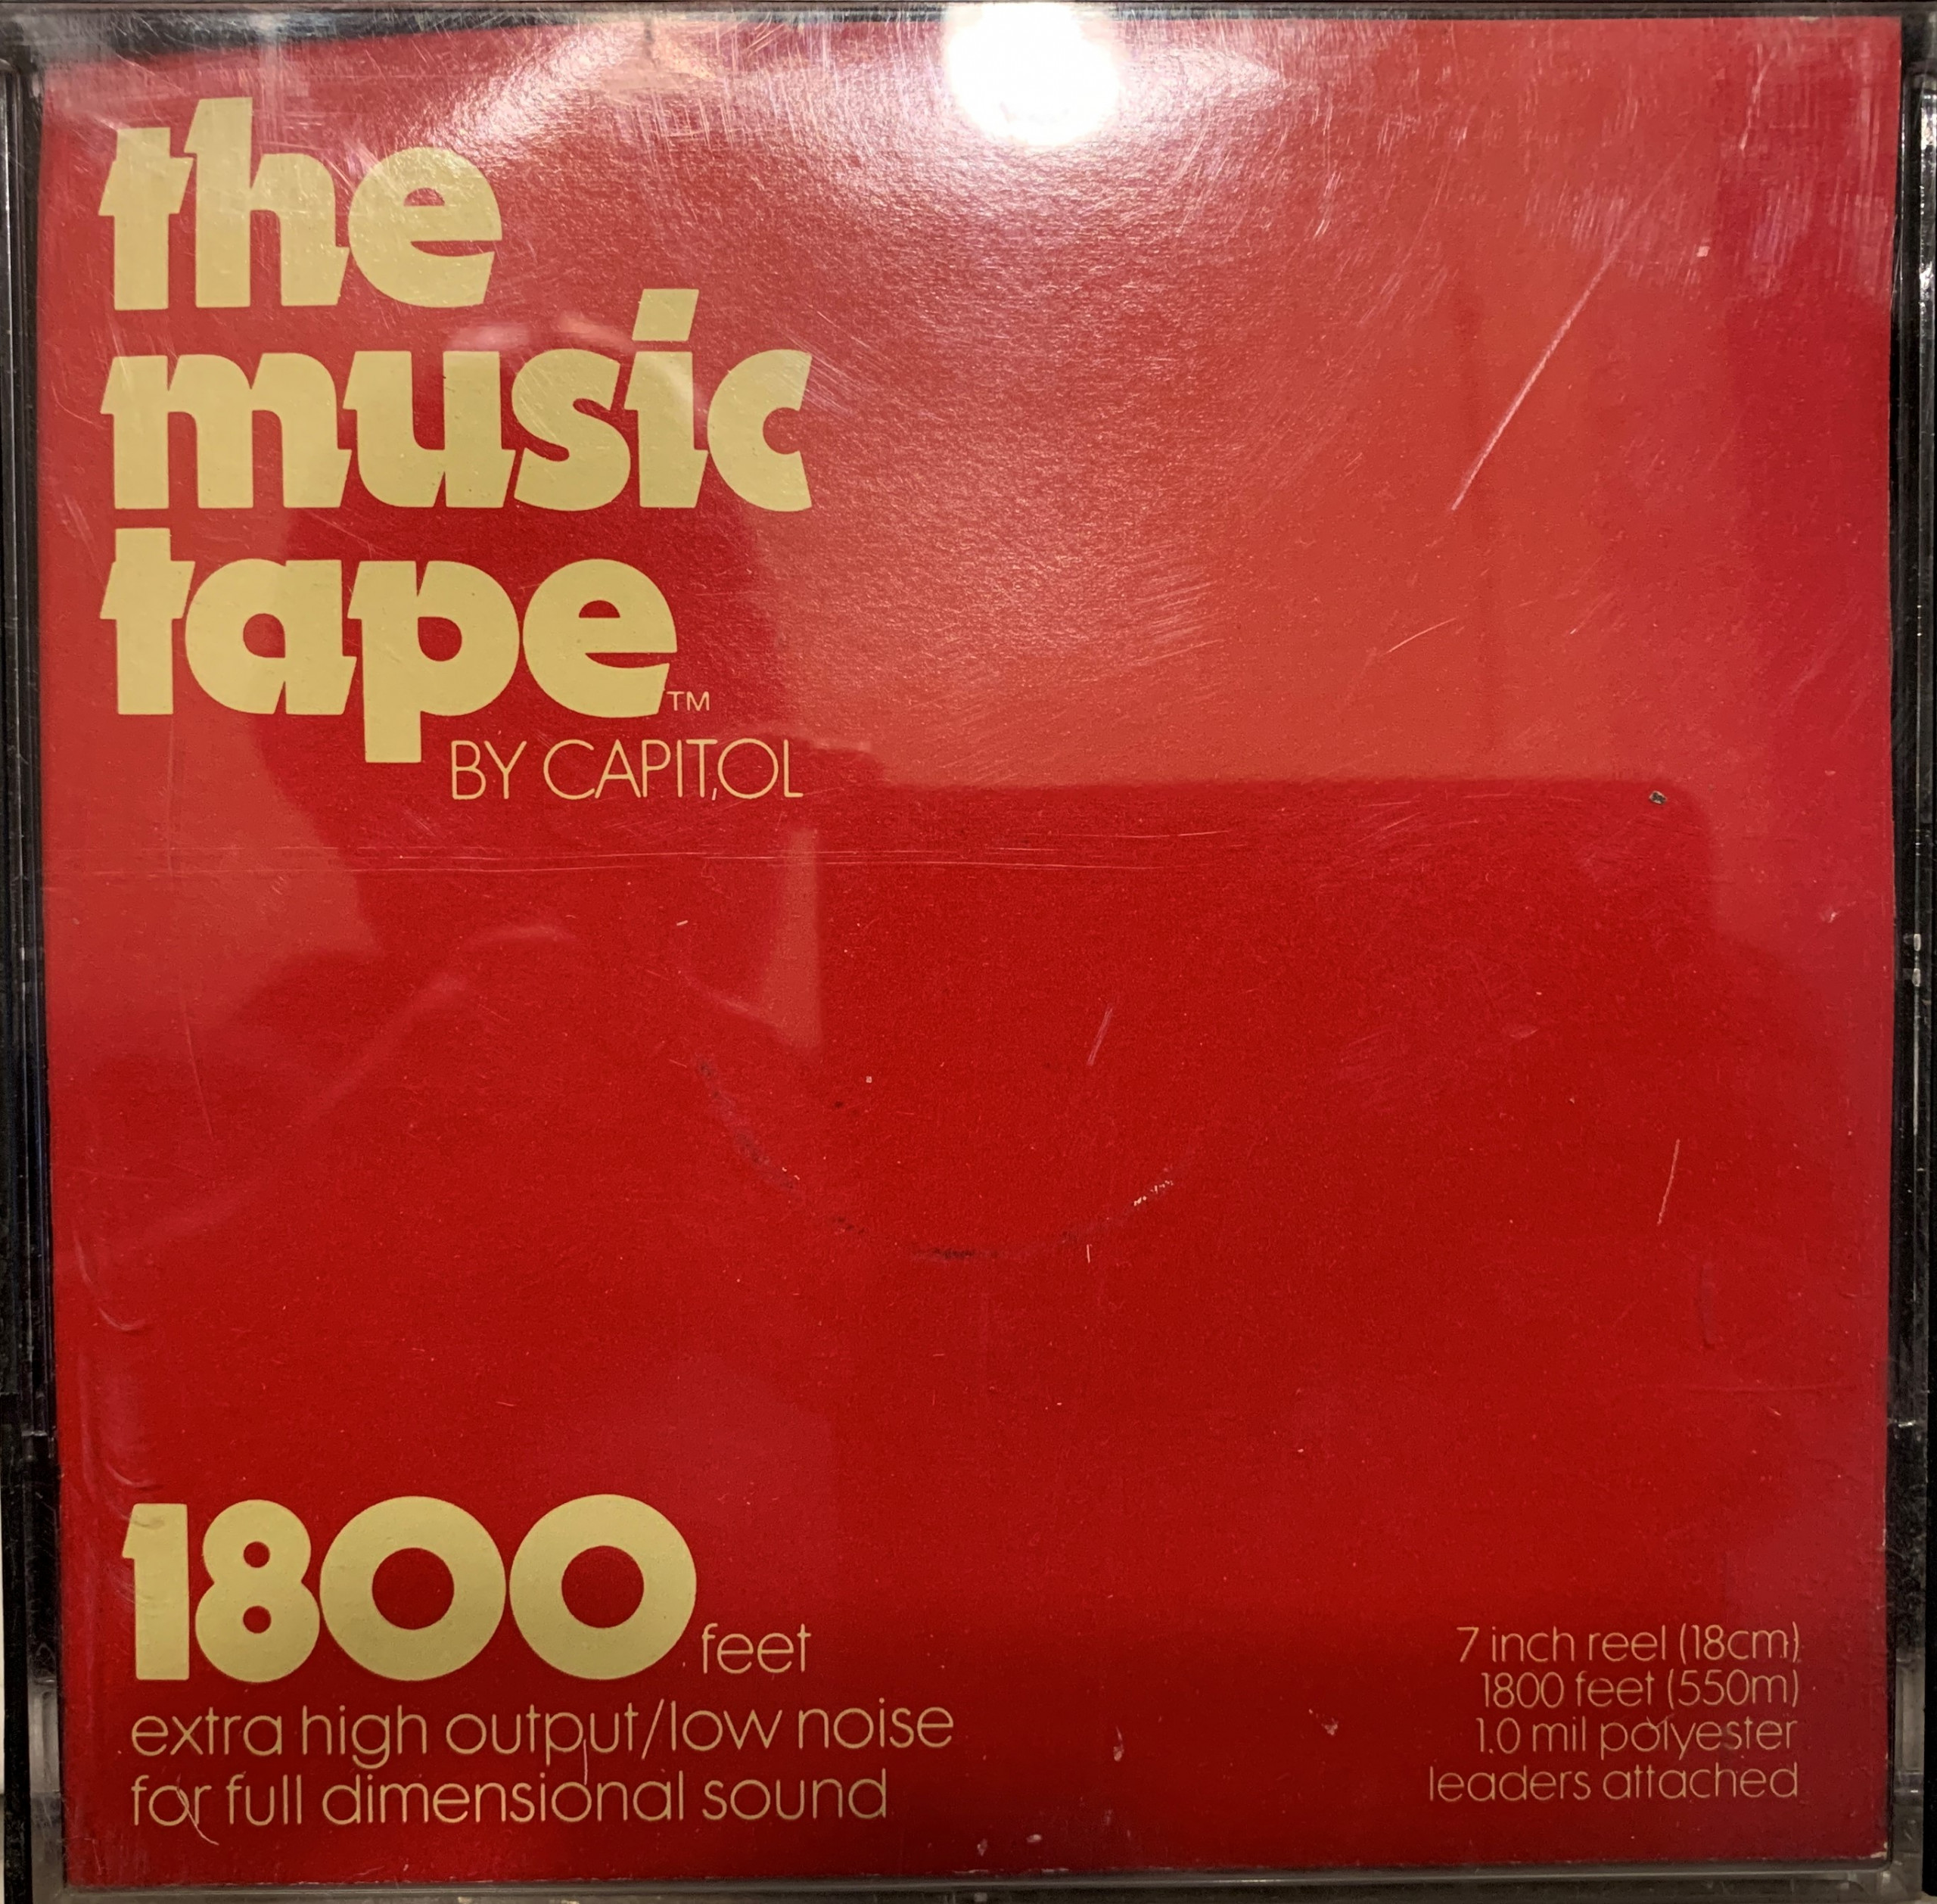 Capitol / Audiotape The Music Tape FDS, LP, 7 Reel, 1800 ft